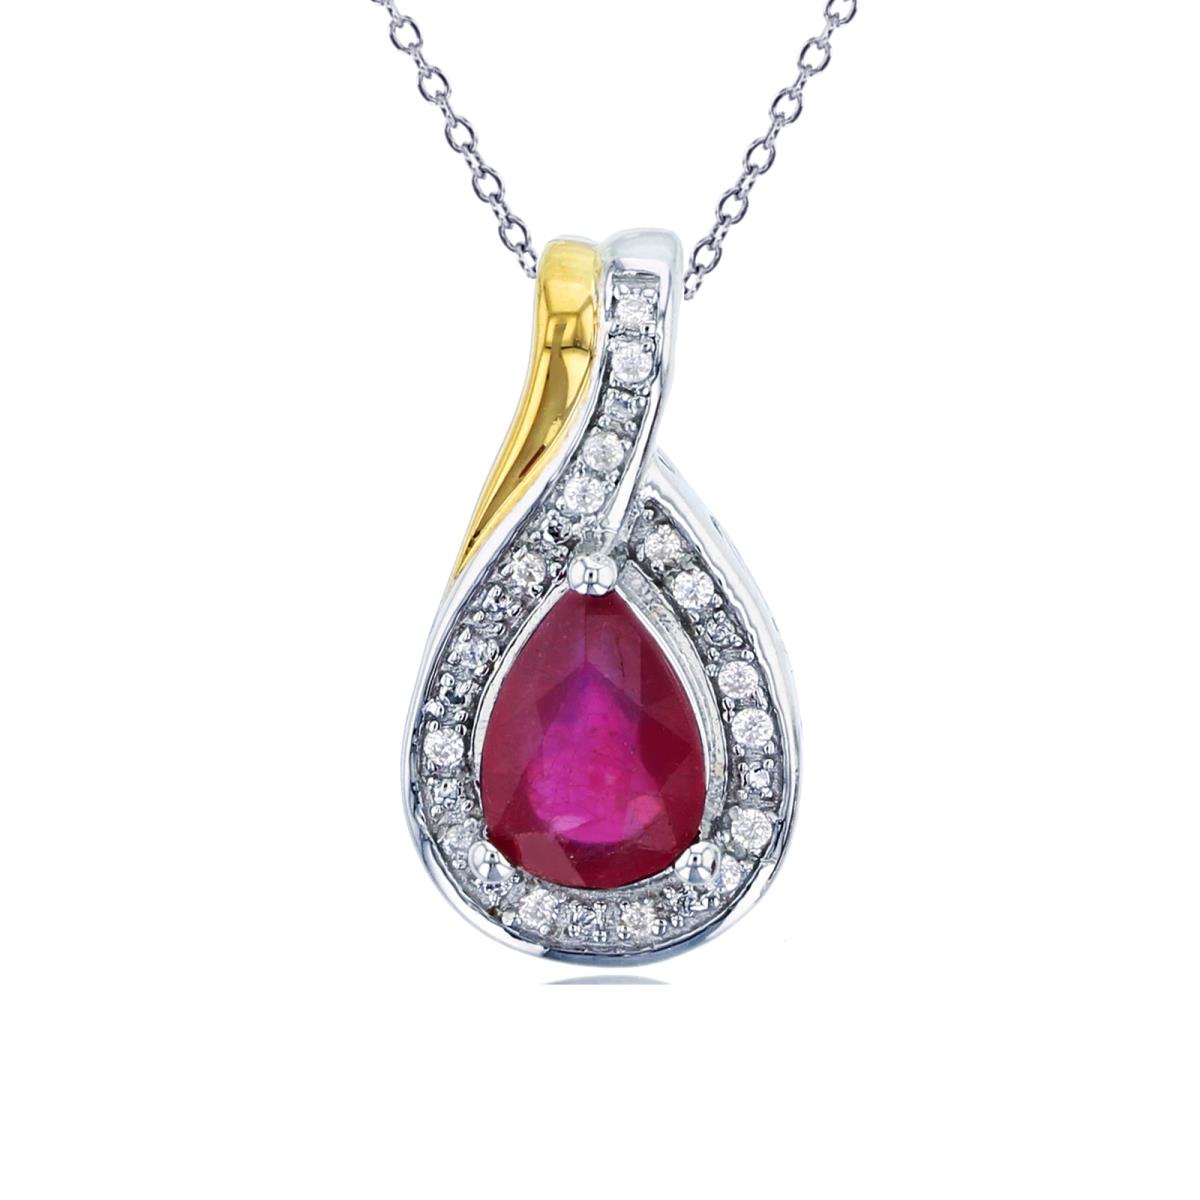 10K Yellow Gold 0.01cttw Rnd Diamonds & 7x5mm PS Glass Filled Ruby 18"Necklace